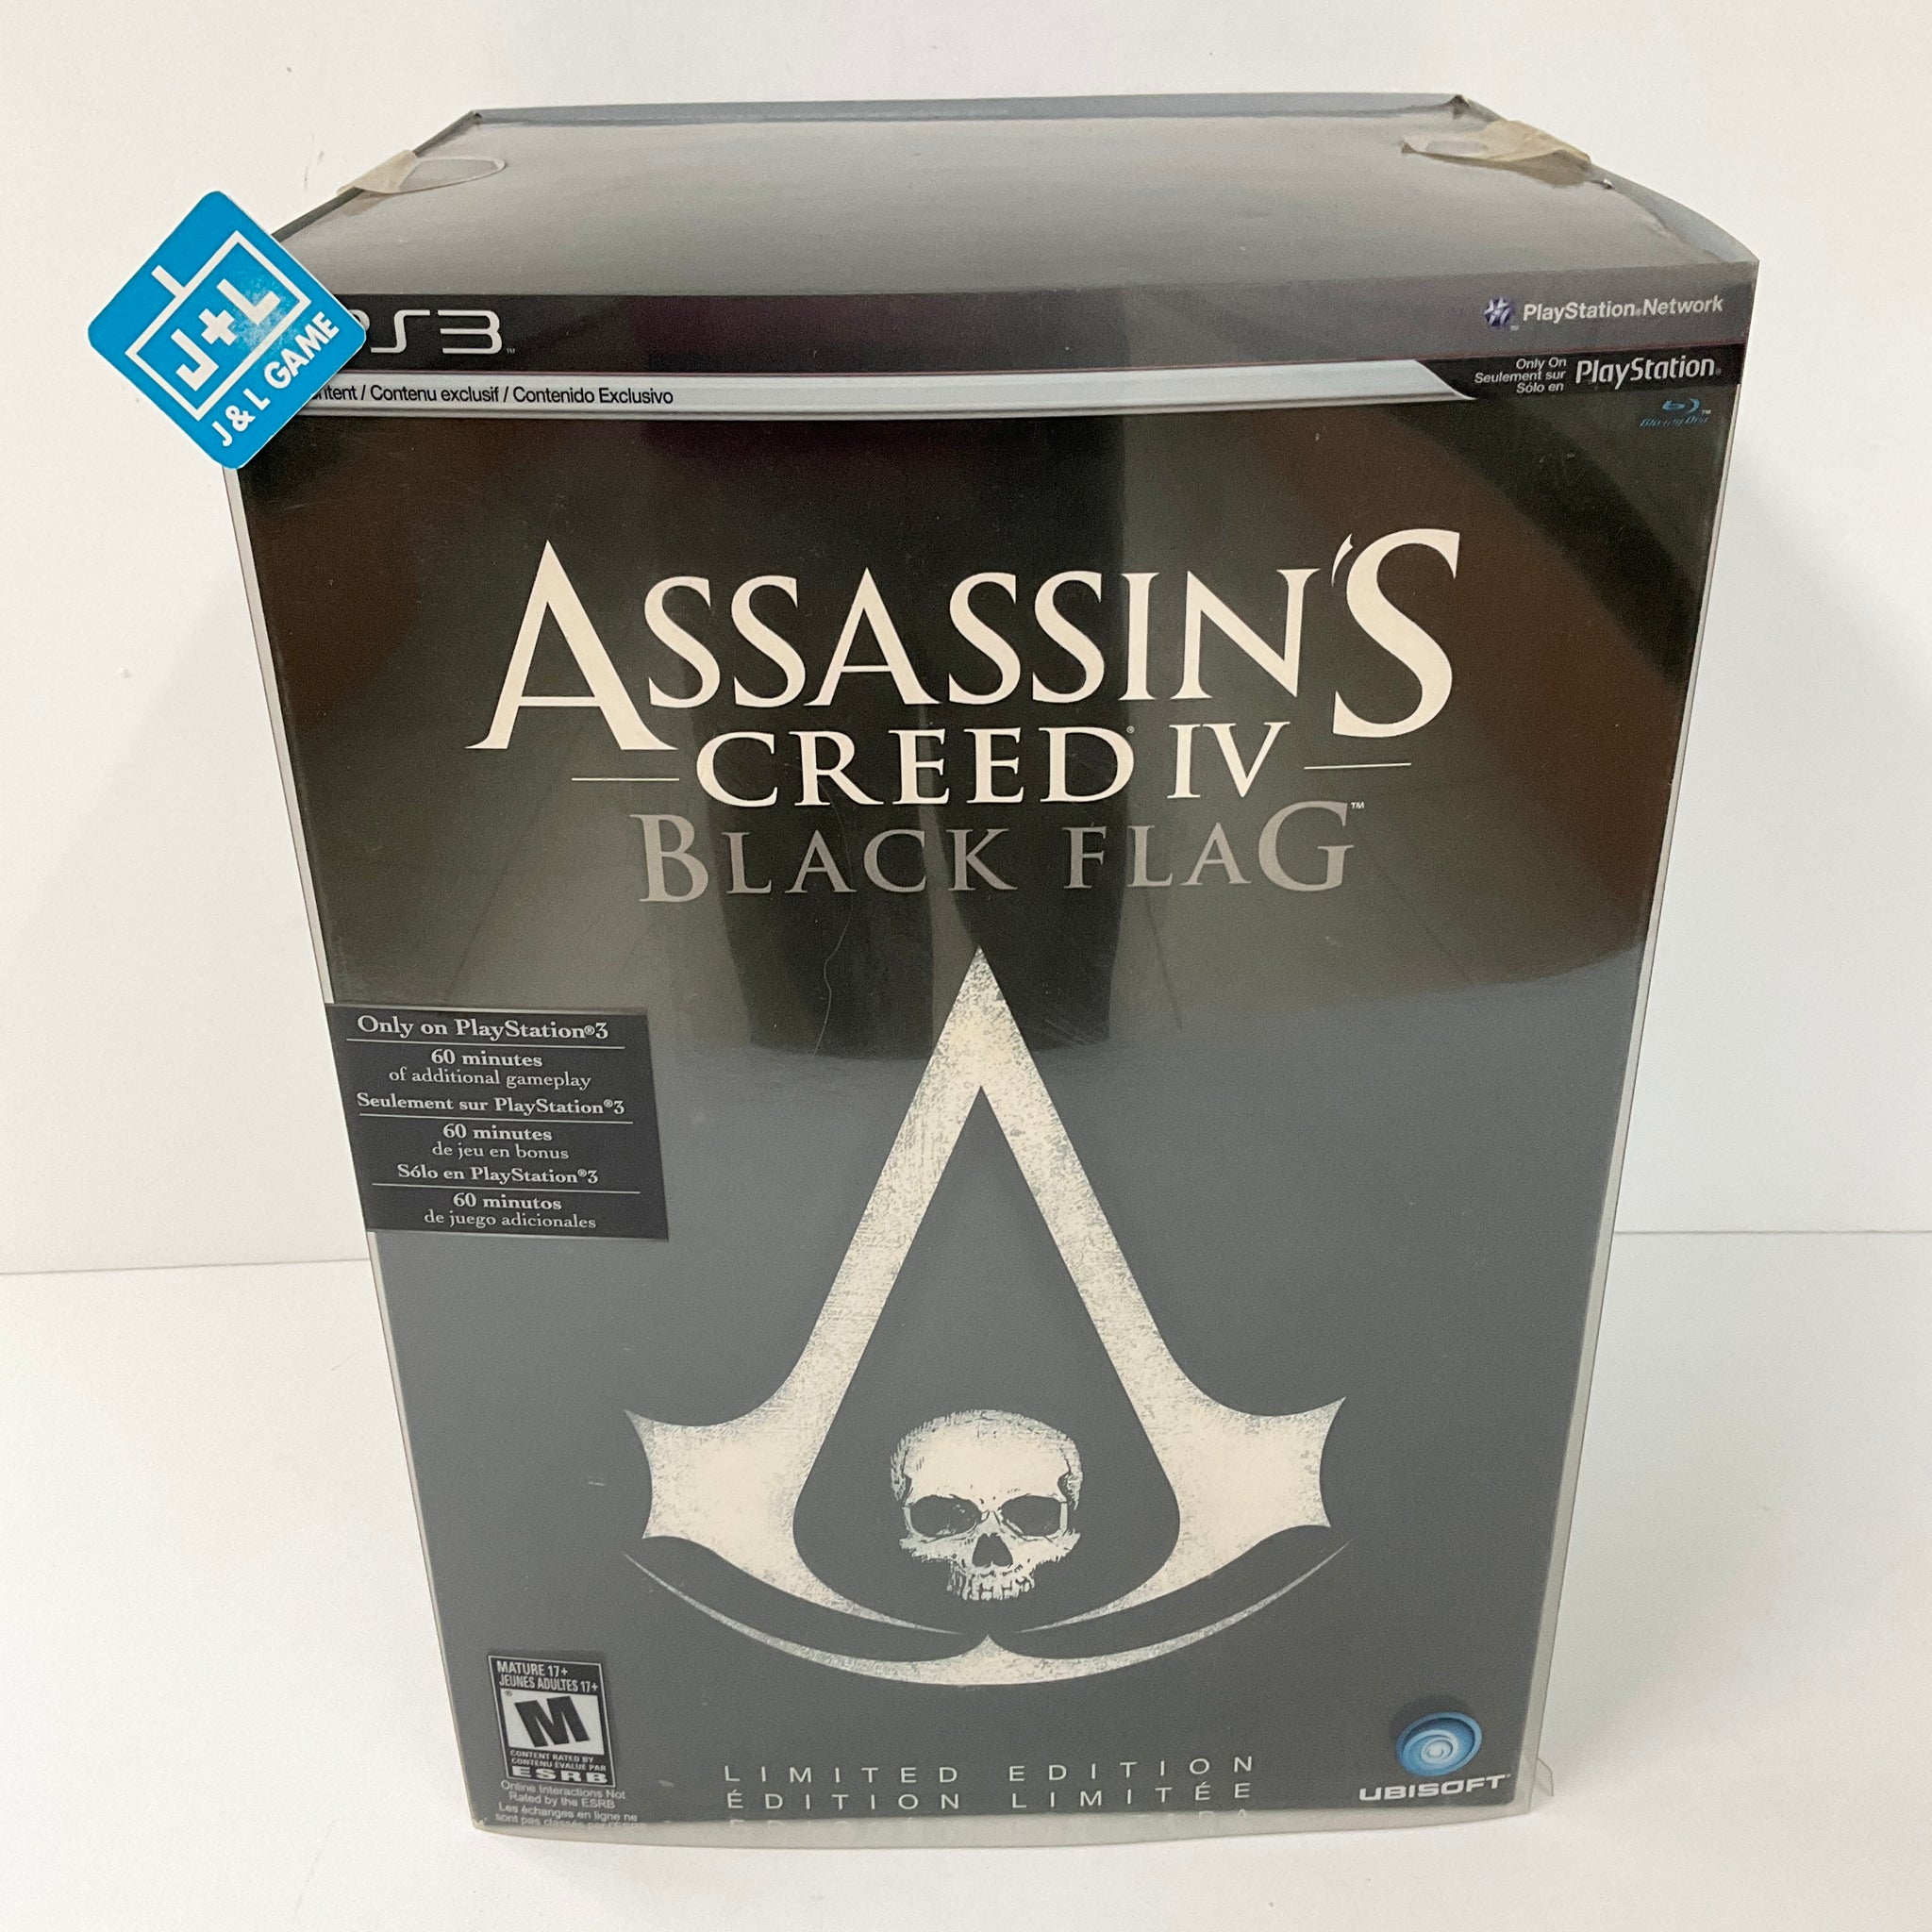 Ps3 - Assassin's Creed IV Black Flag Sony PlayStation 3 W/ Case #111